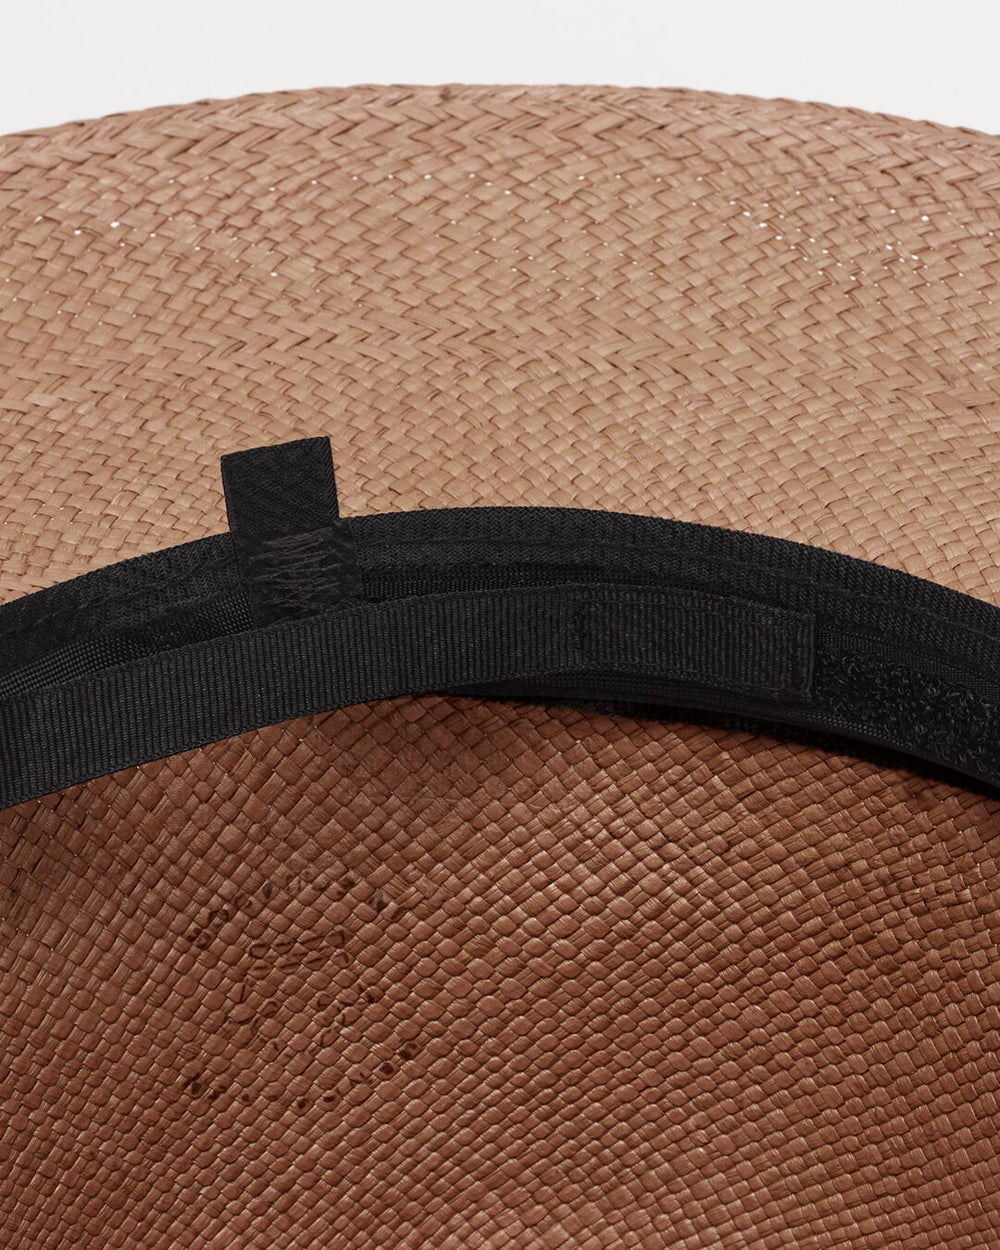 Close-up of a woven hat with a band around it.